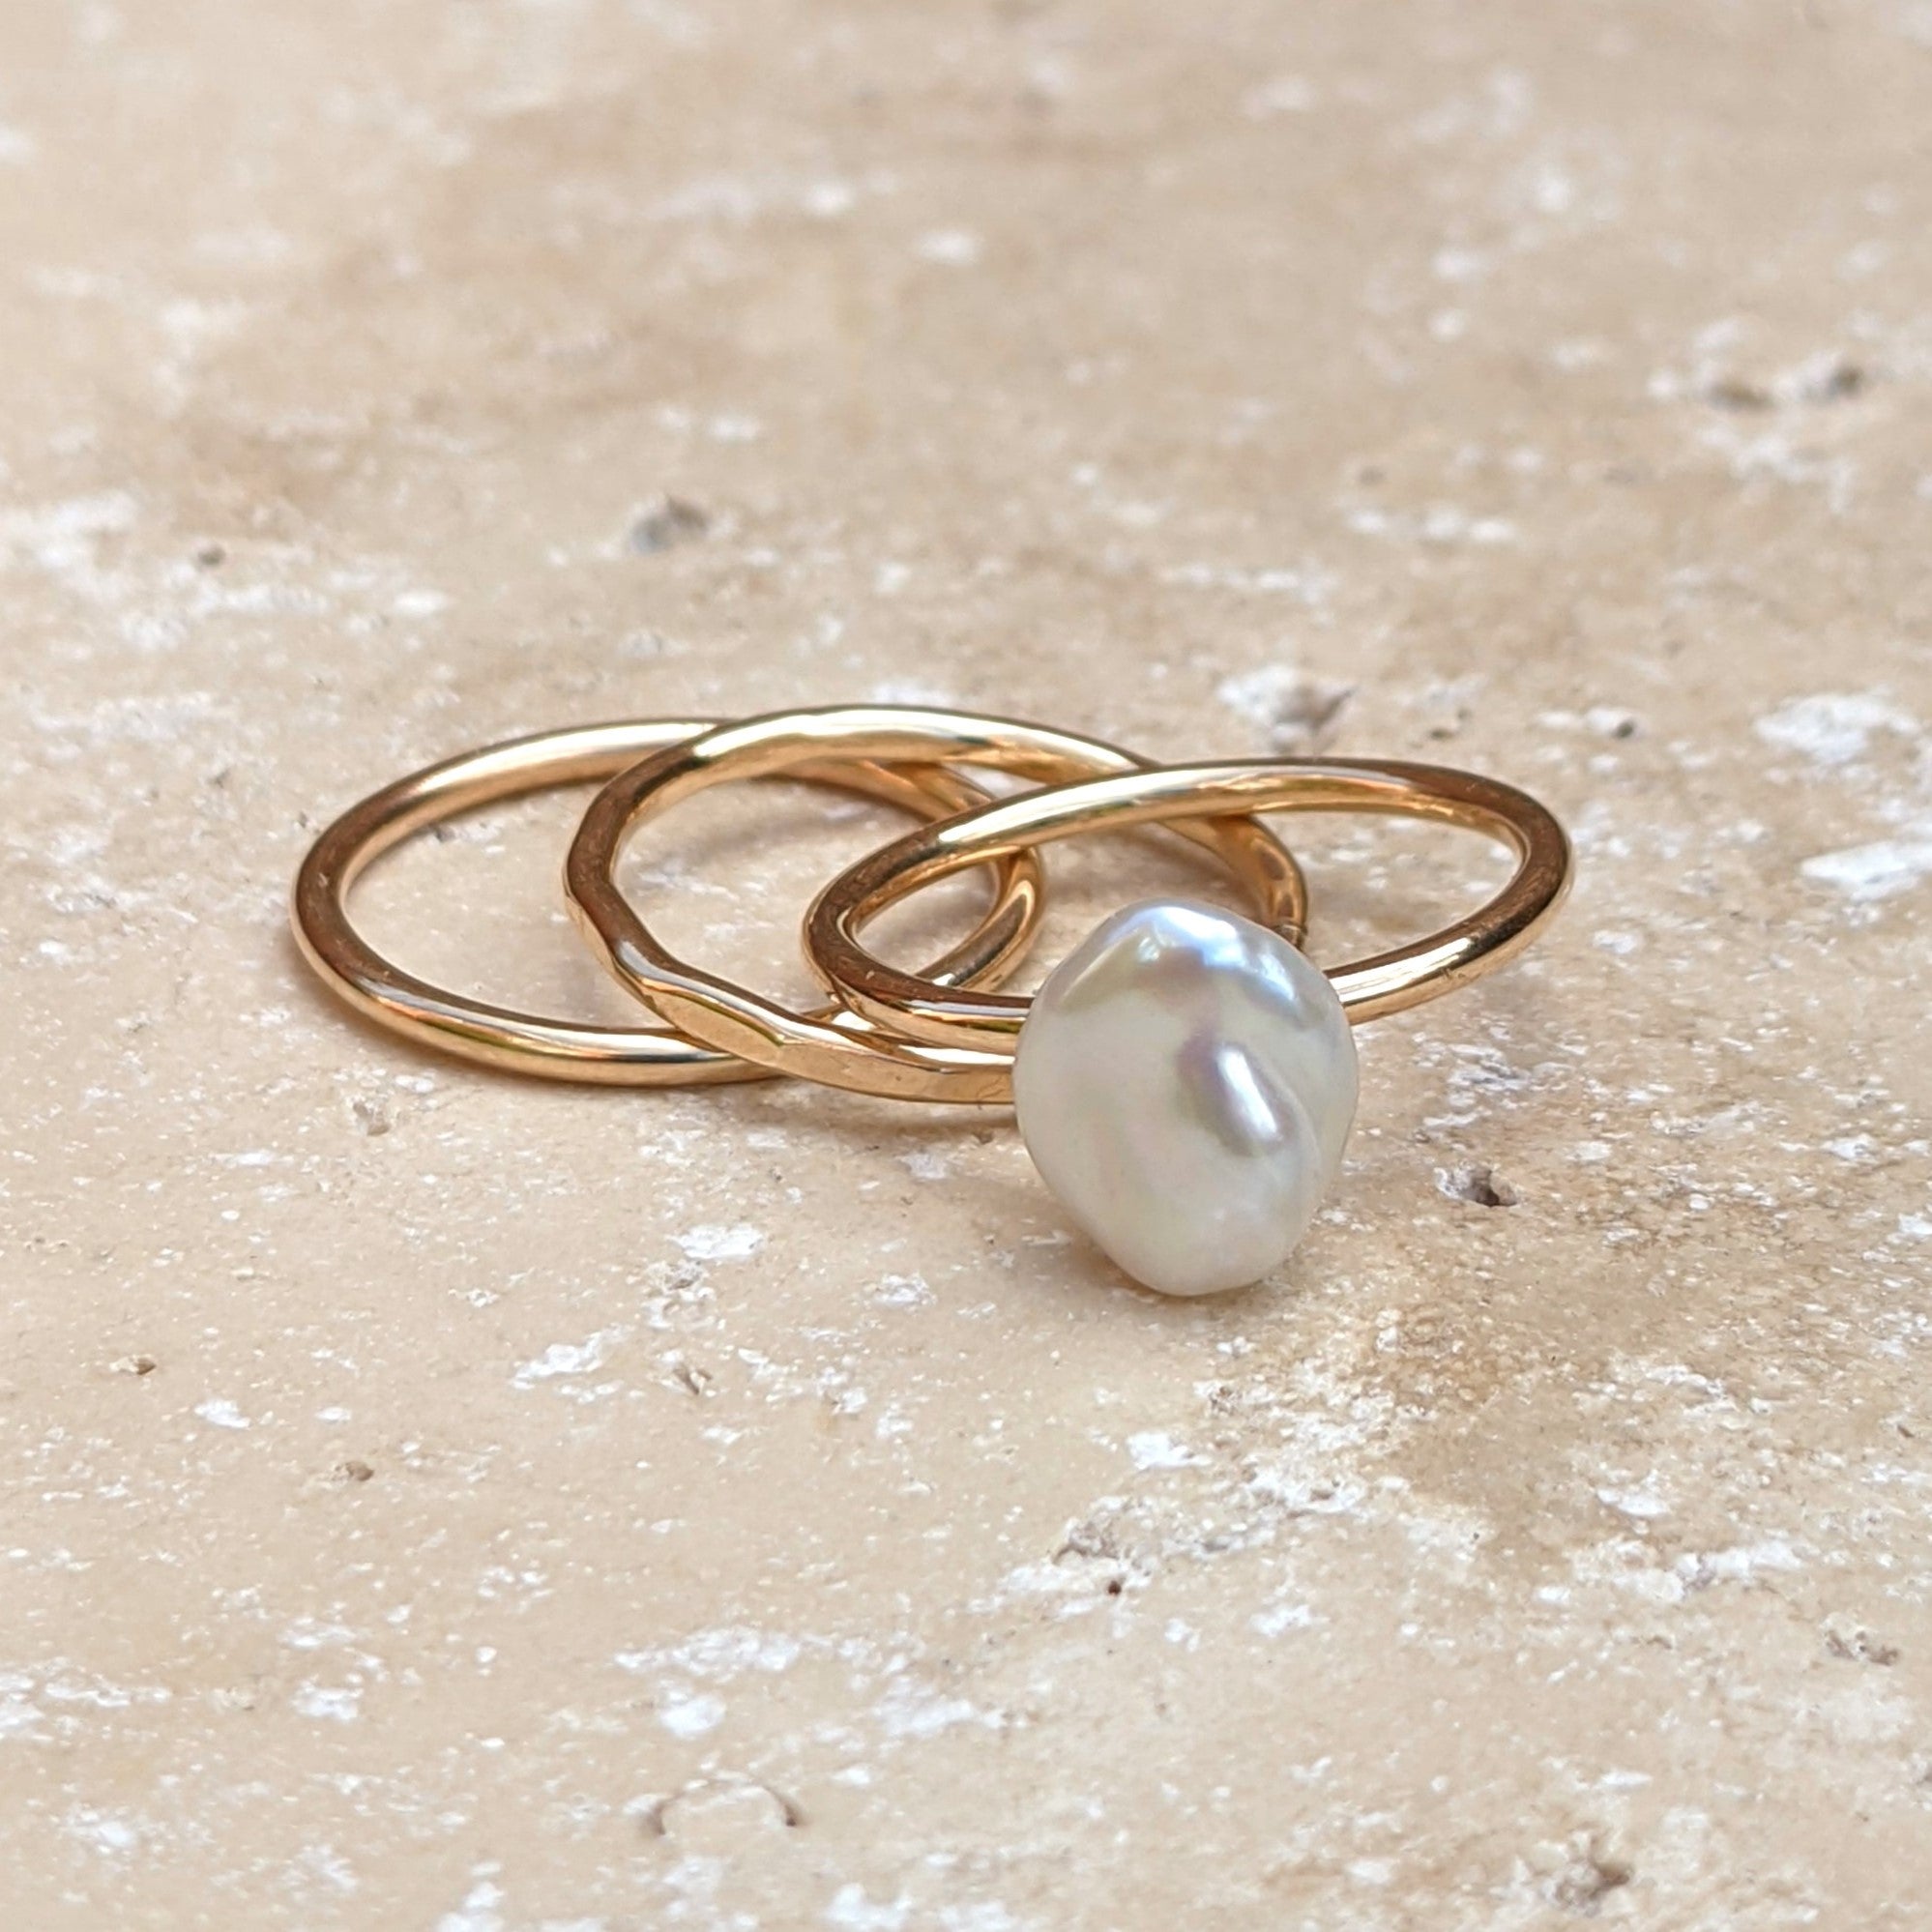 Set of three gold rings - plain hammered and pearl